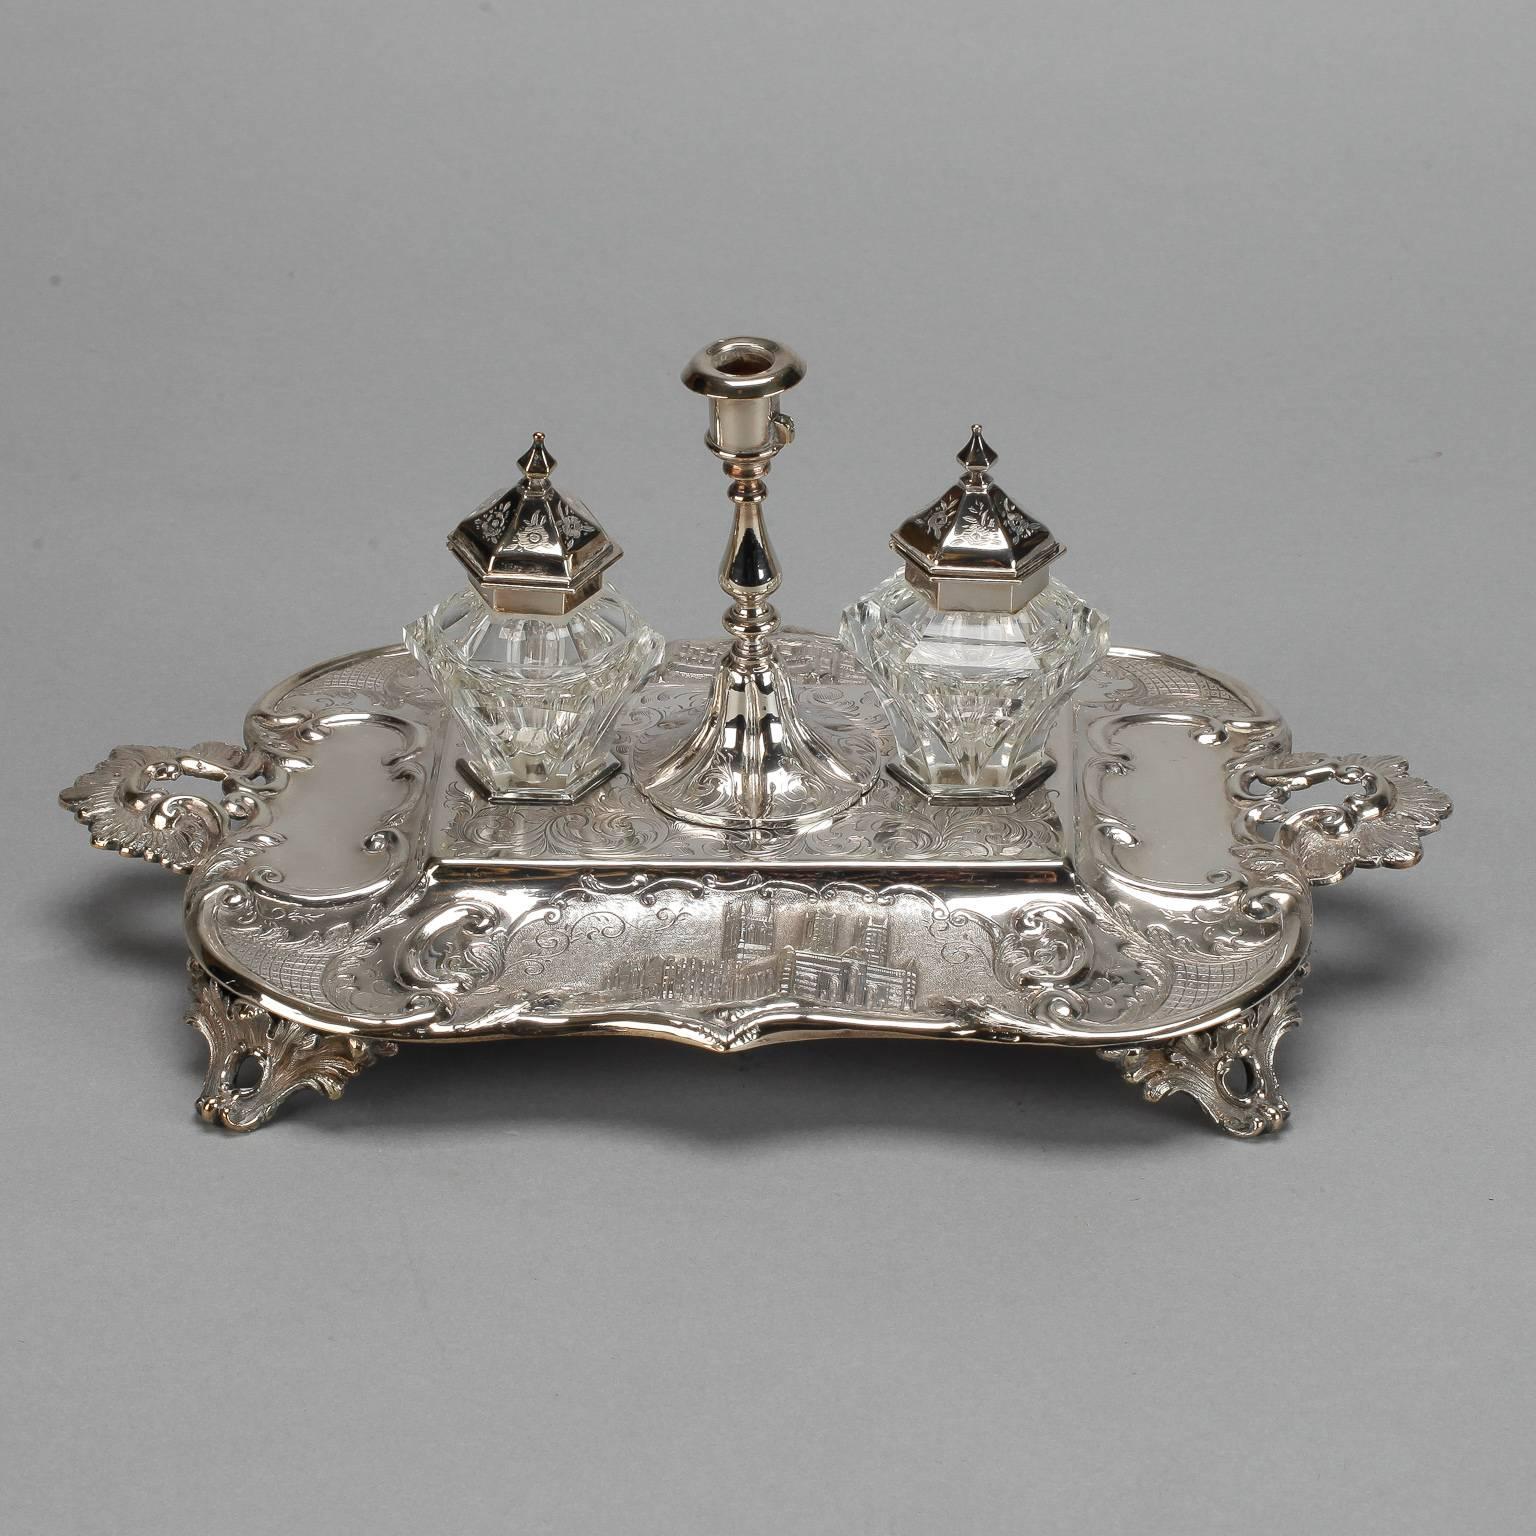 Found in England, this silver plated ink well set includes a silver plated tray with decorative handles and feet, two clear cut glass inkwells with silver plated tops and a coordinating silver plate candlestick. Sold and priced as a four piece set.